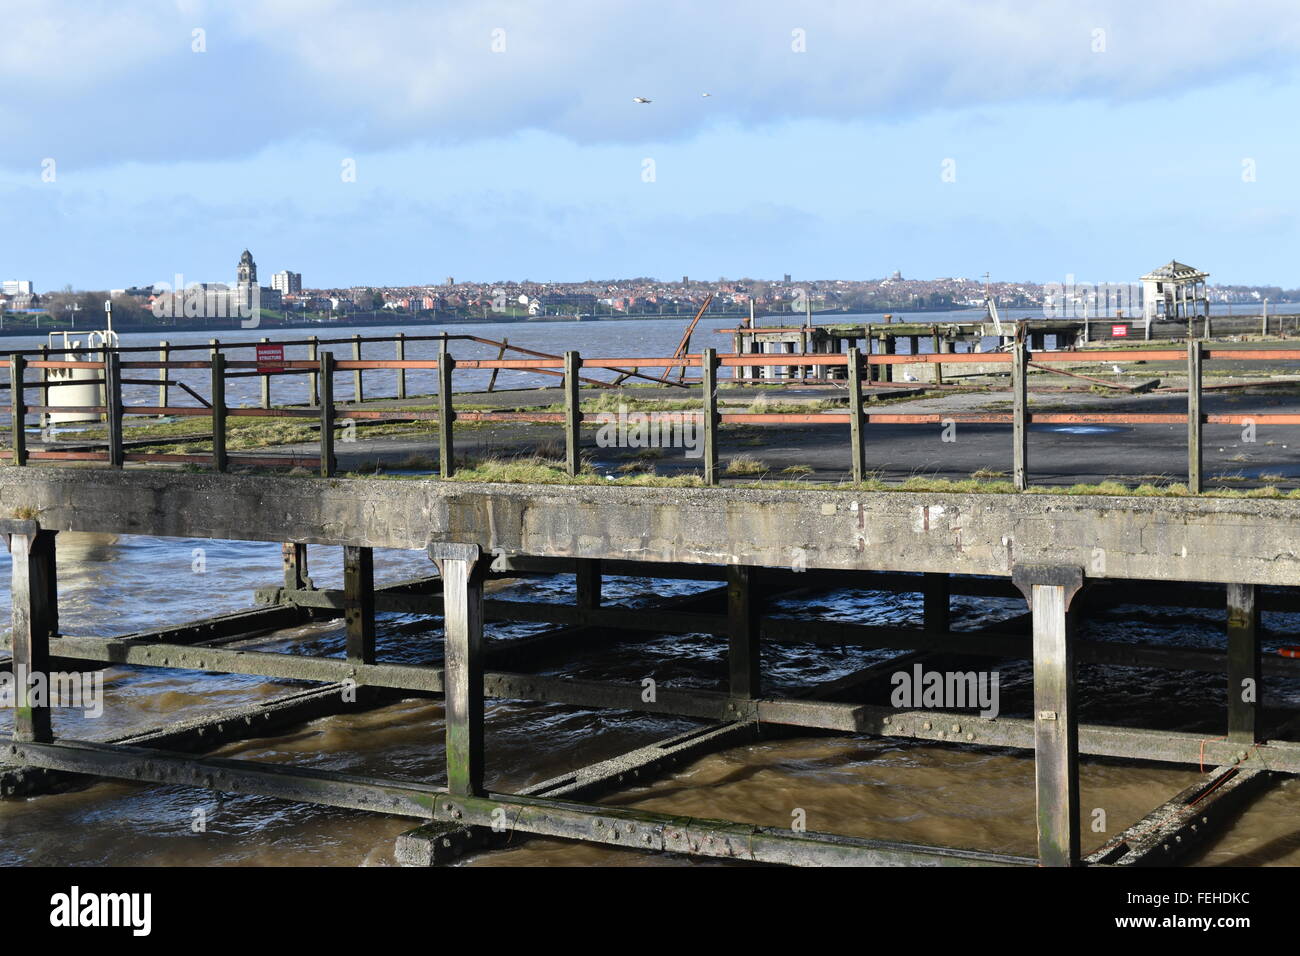 Liverpool waterfront looking over the River Mersey towards Wallasey on the Wirral peninsular. Stock Photo